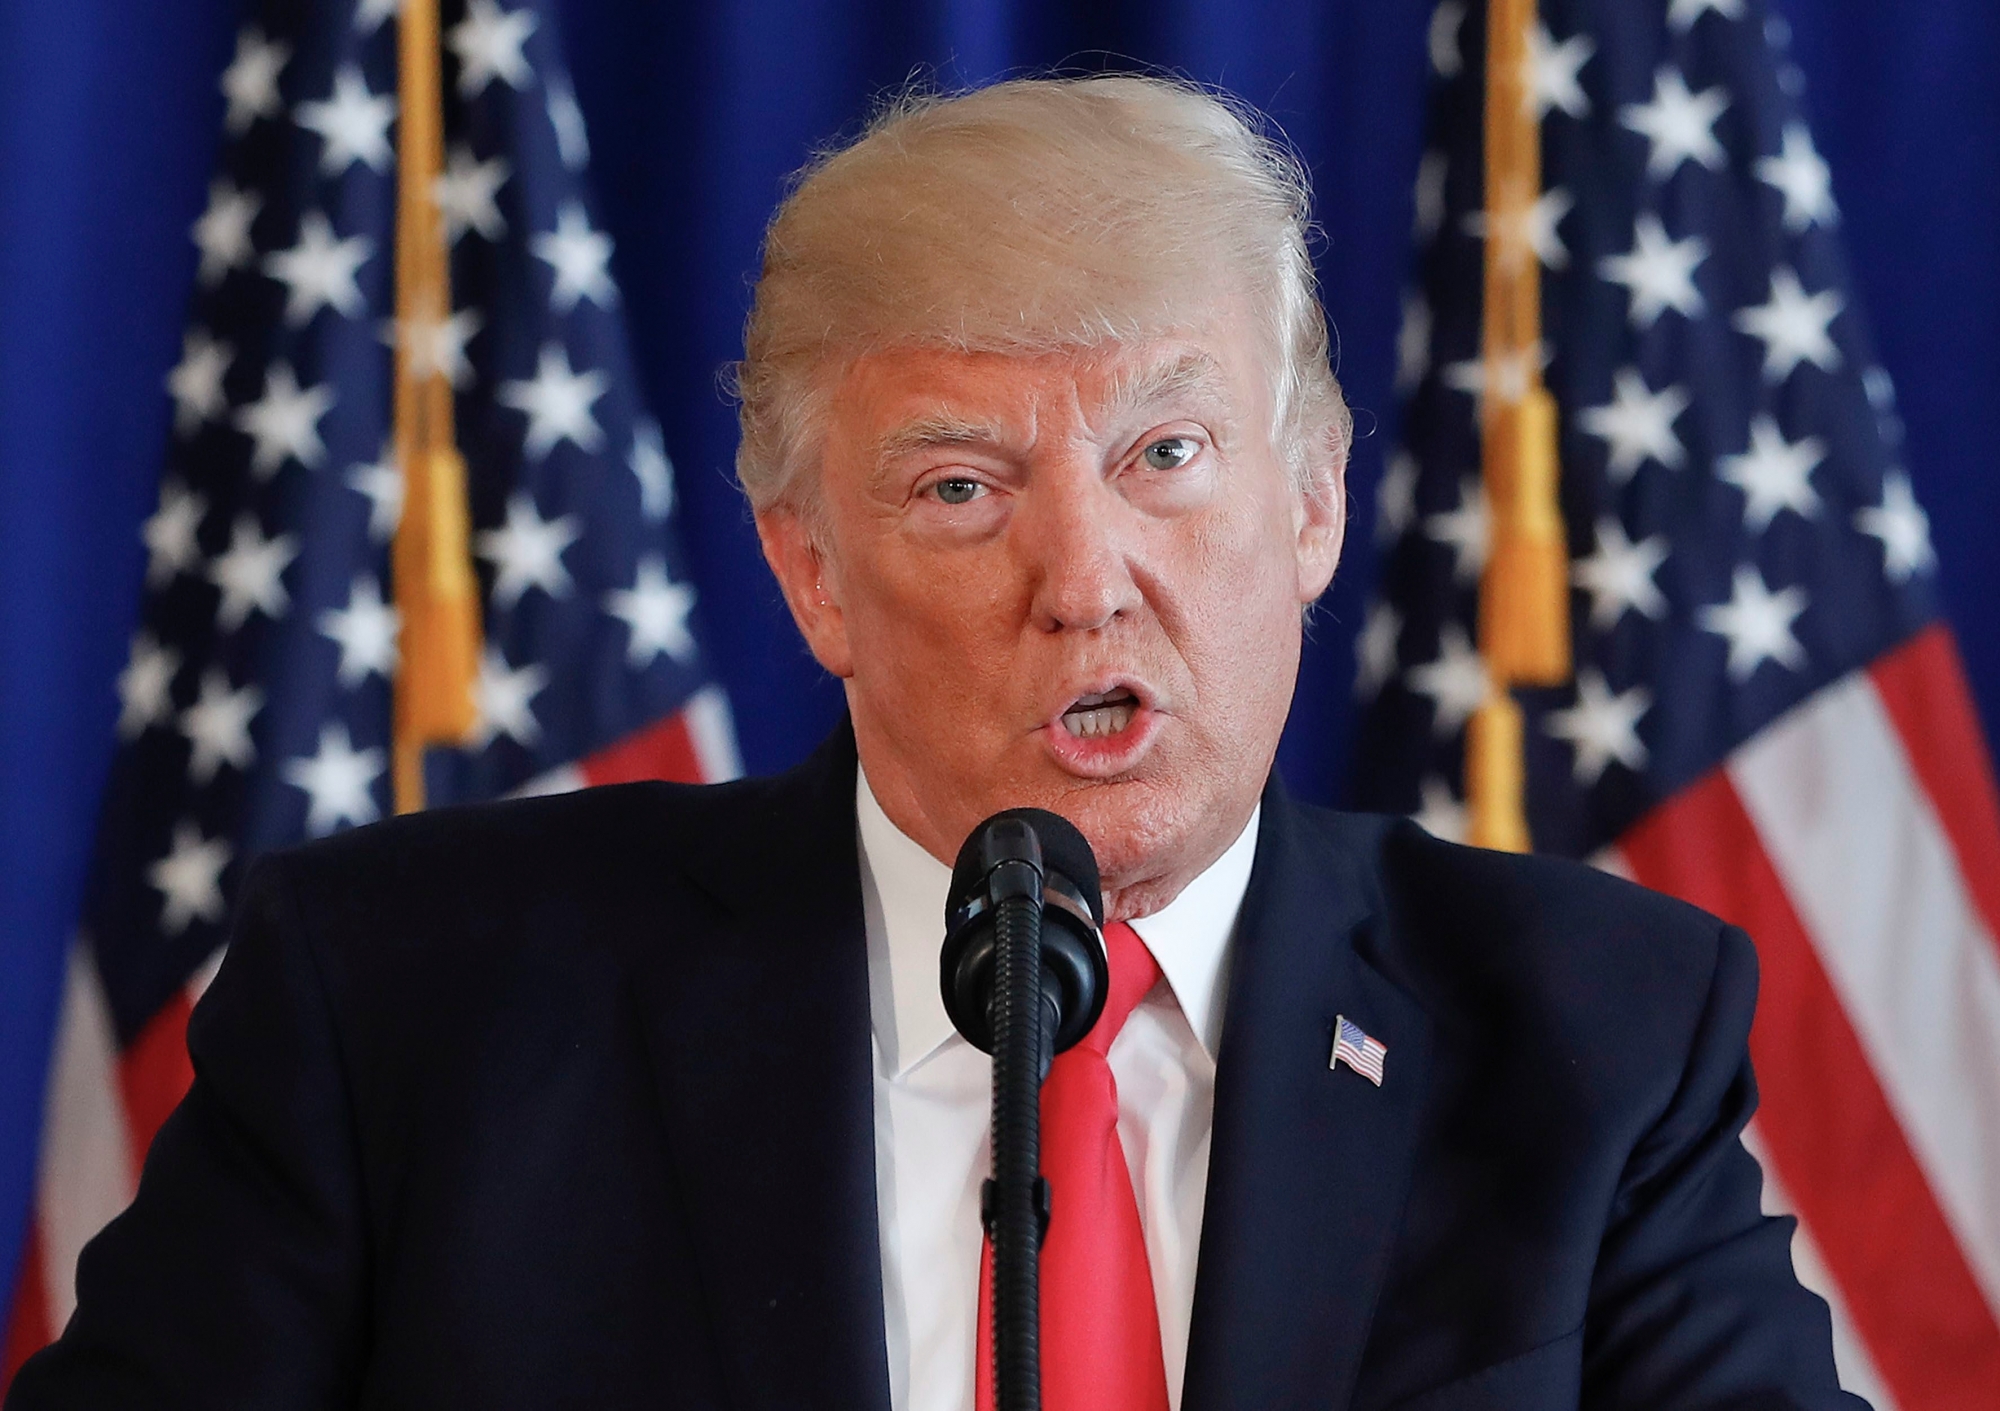 President Donald Trump speaks regarding the on going situation in Charlottesville, Va., Saturday, Aug. 12, 2017 at Trump National Golf Club in Bedminster, N.J. (AP Photo/Pablo Martinez Monsivais) Trump